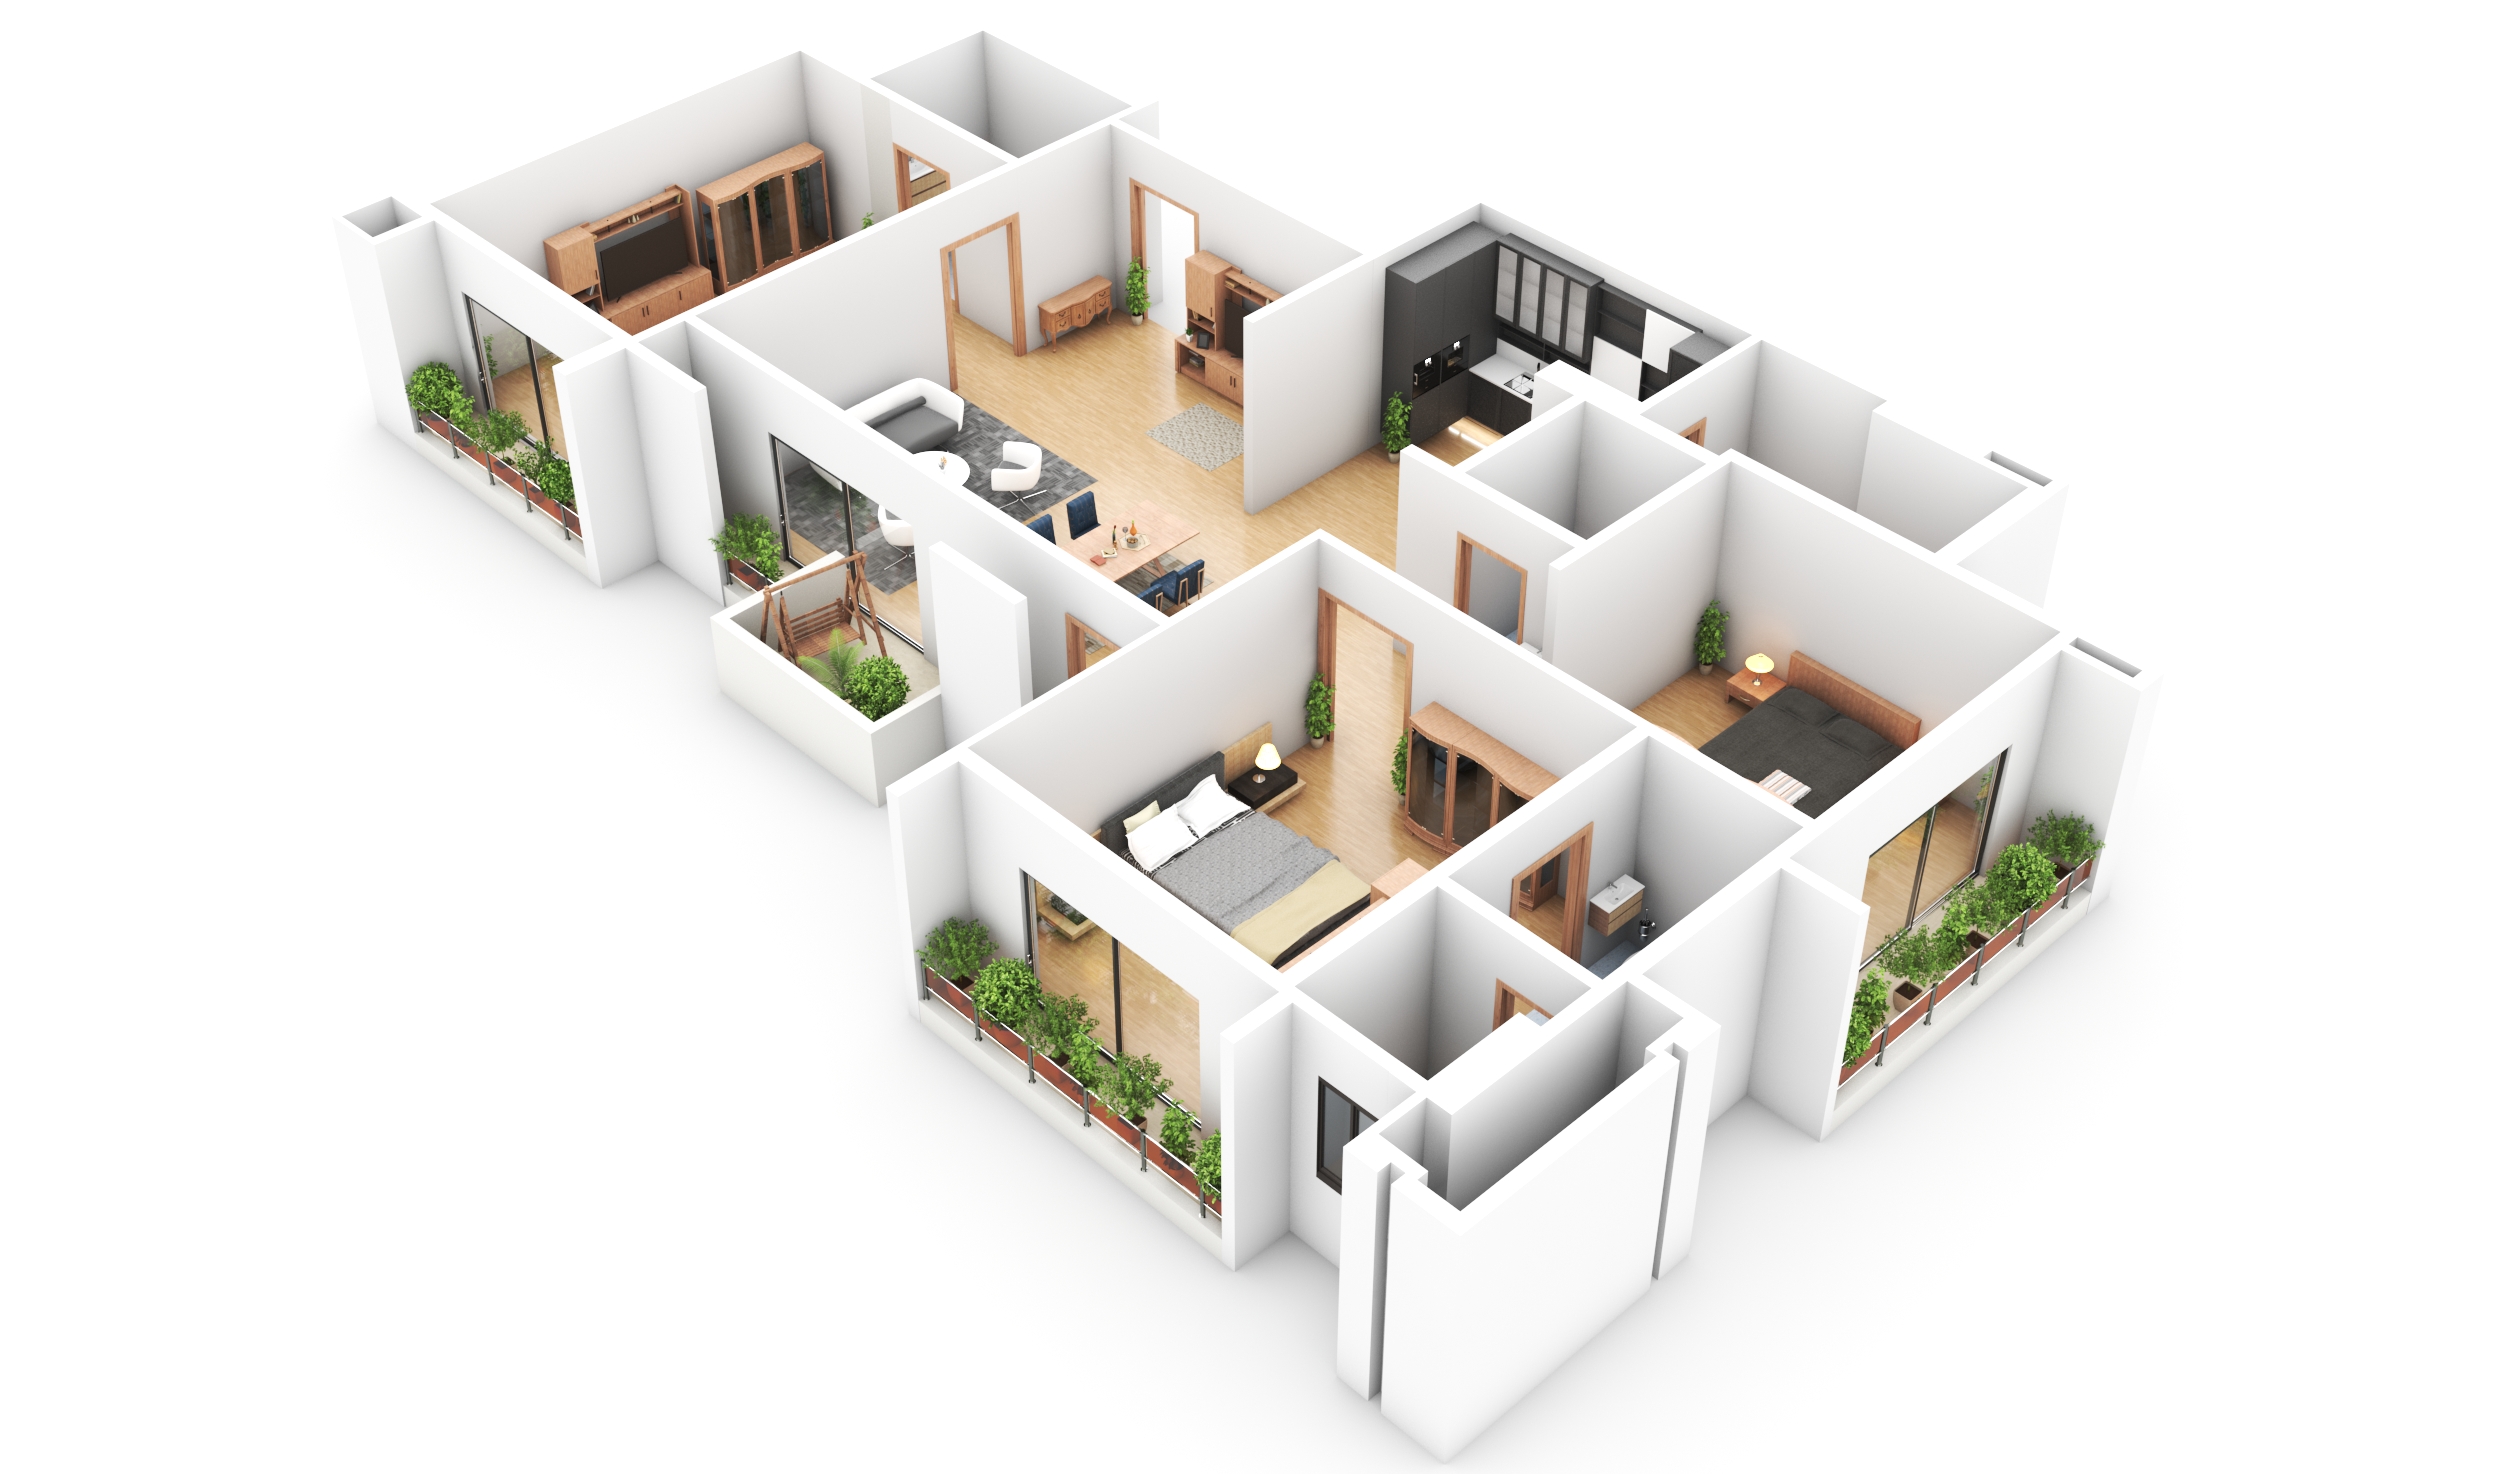 152413I will create apartment building 3d design and 2d floor plan